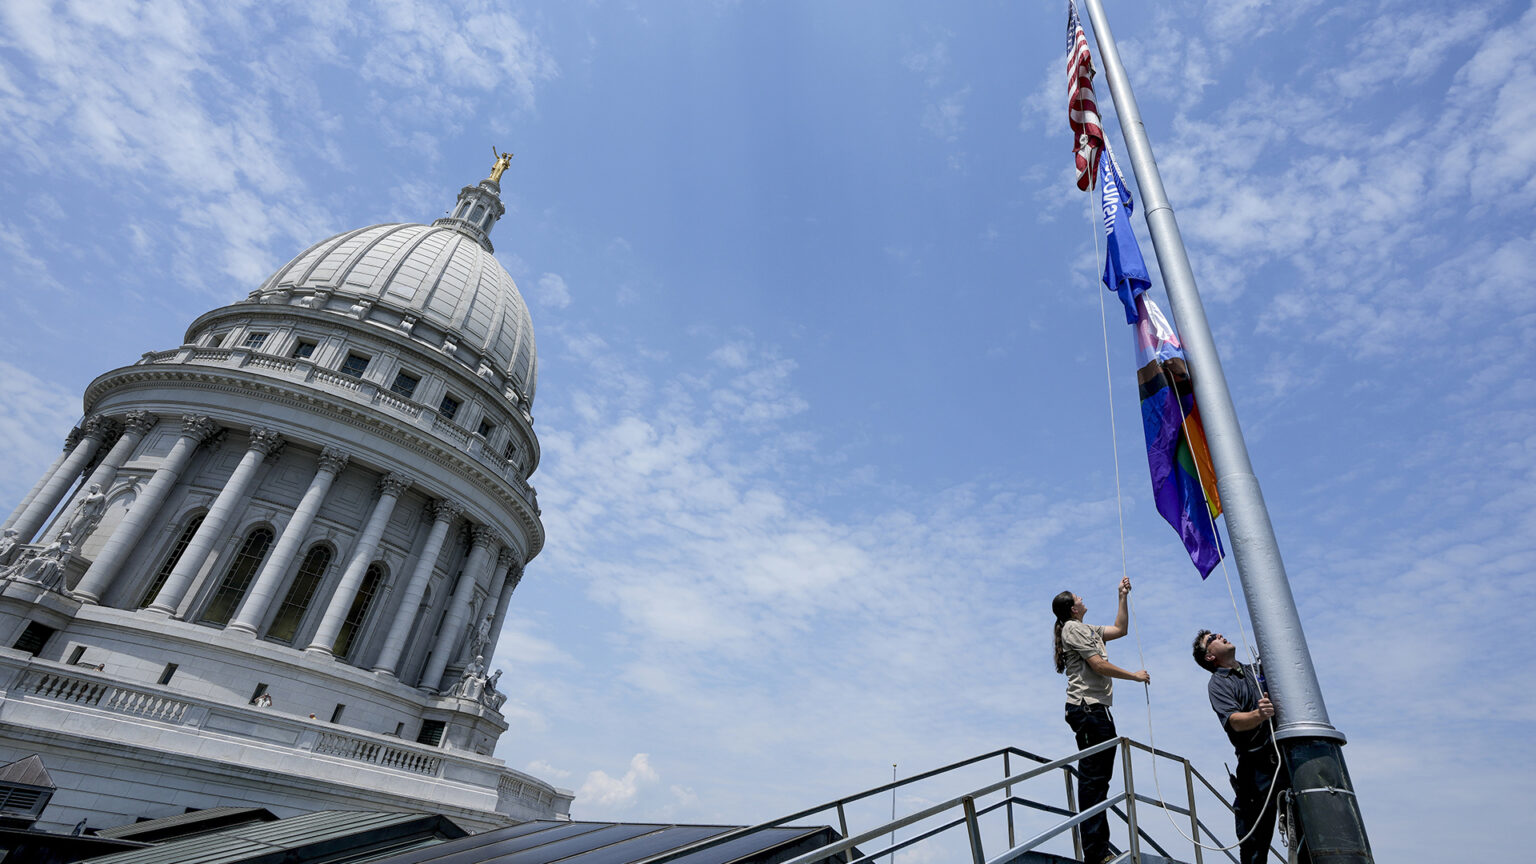 Mindy Fude and Steve Walker stand on a walkway and hold different ends of halyard rope to raise the U.S., Wisconsin and Progress Pride flags on a flagpole, with the skylights of one wing of the Wisconsin State Capitol and its dome in the background.